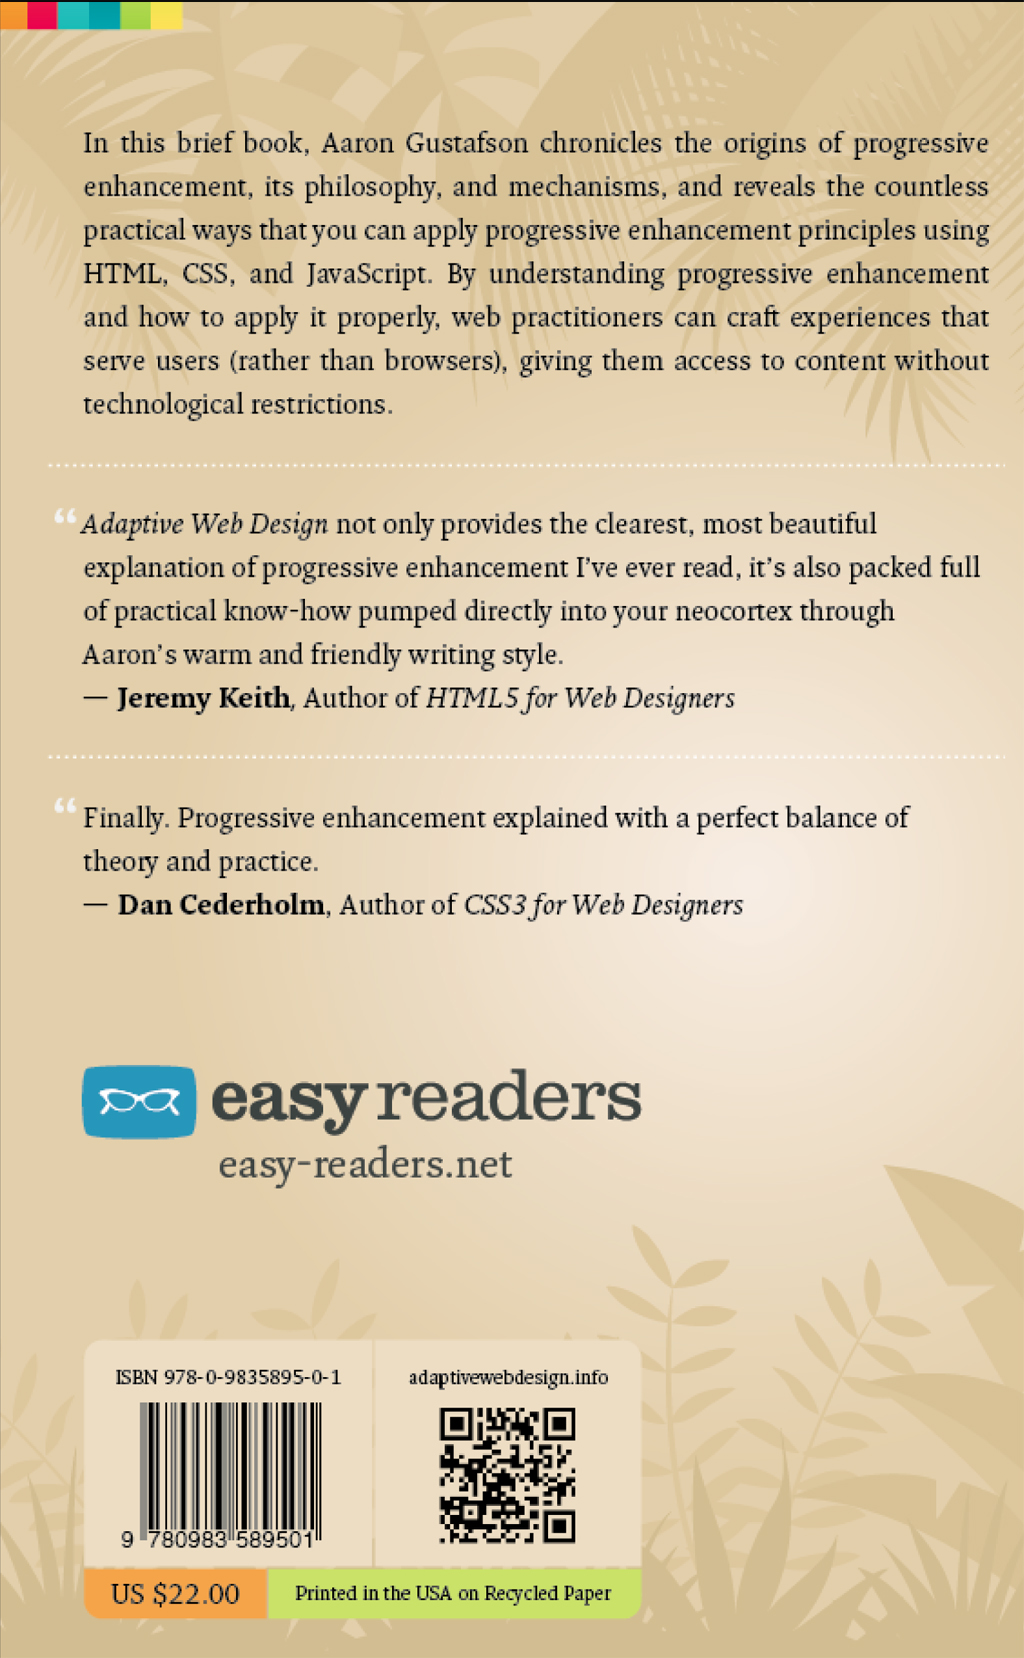 Back Cover of Adaptive Web Design by Aaron Gustafson